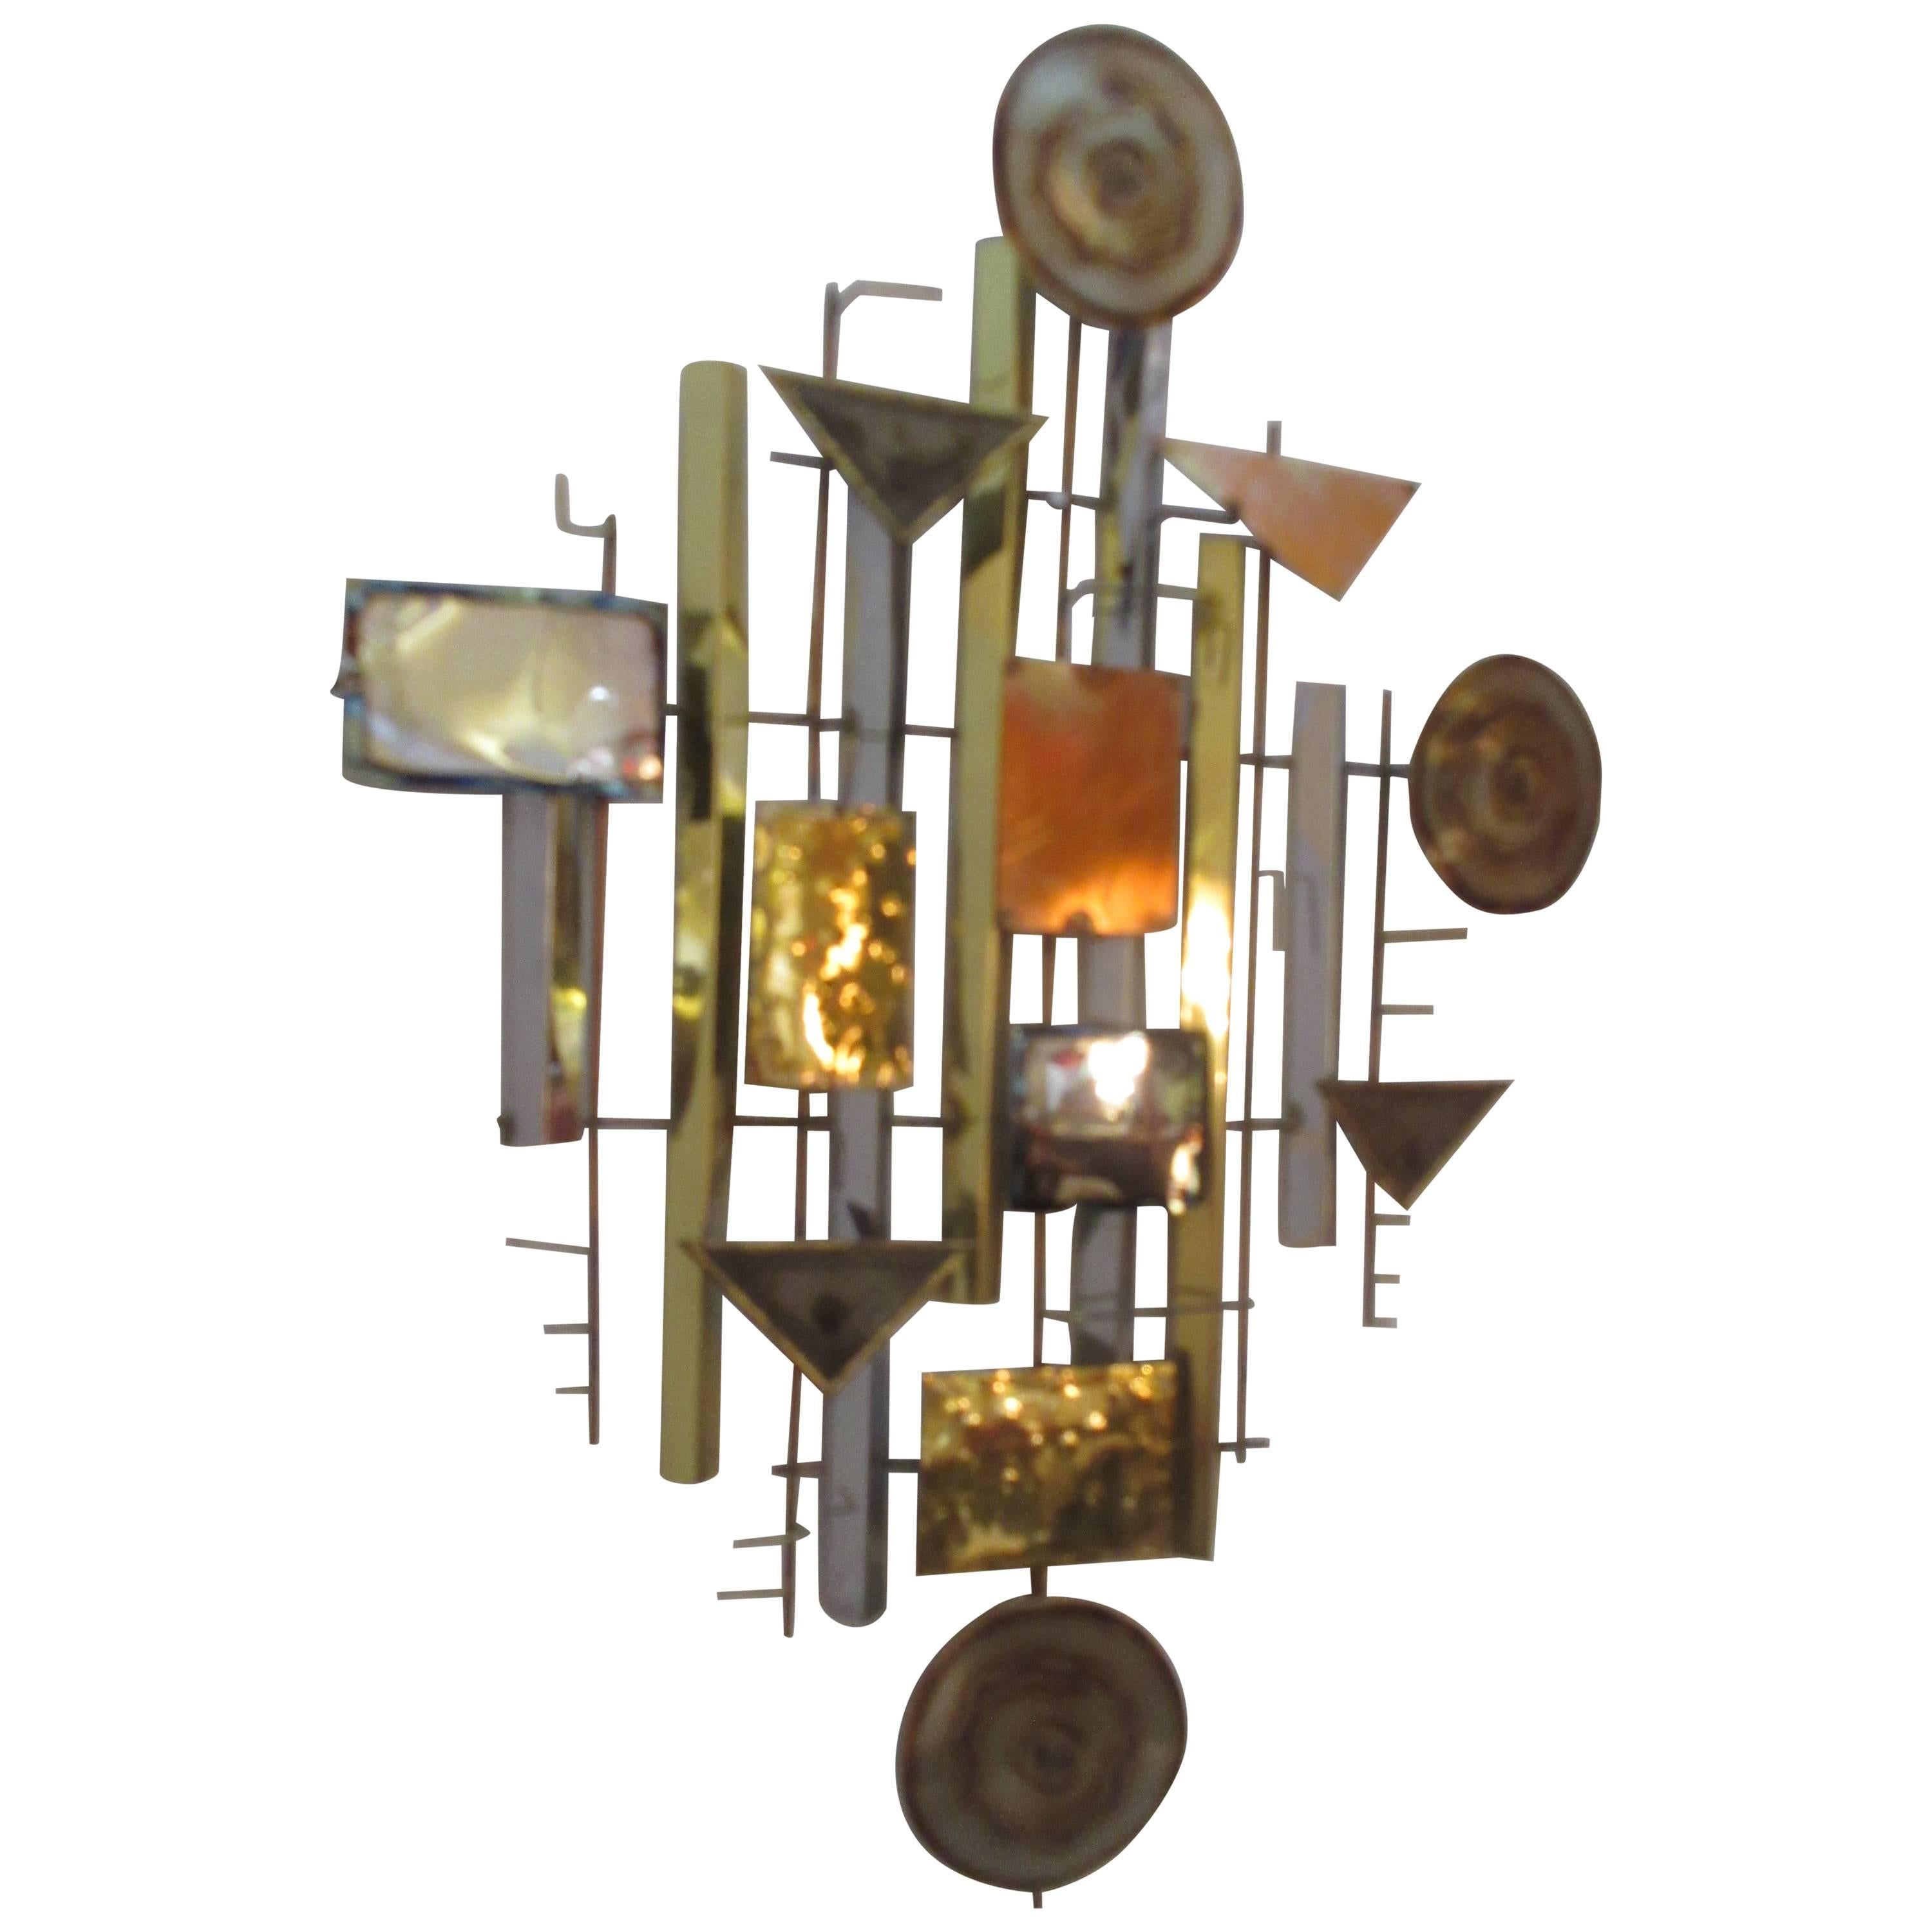 Abstract Brutalist Metal Wall Sculpture in the Style of C. Jere